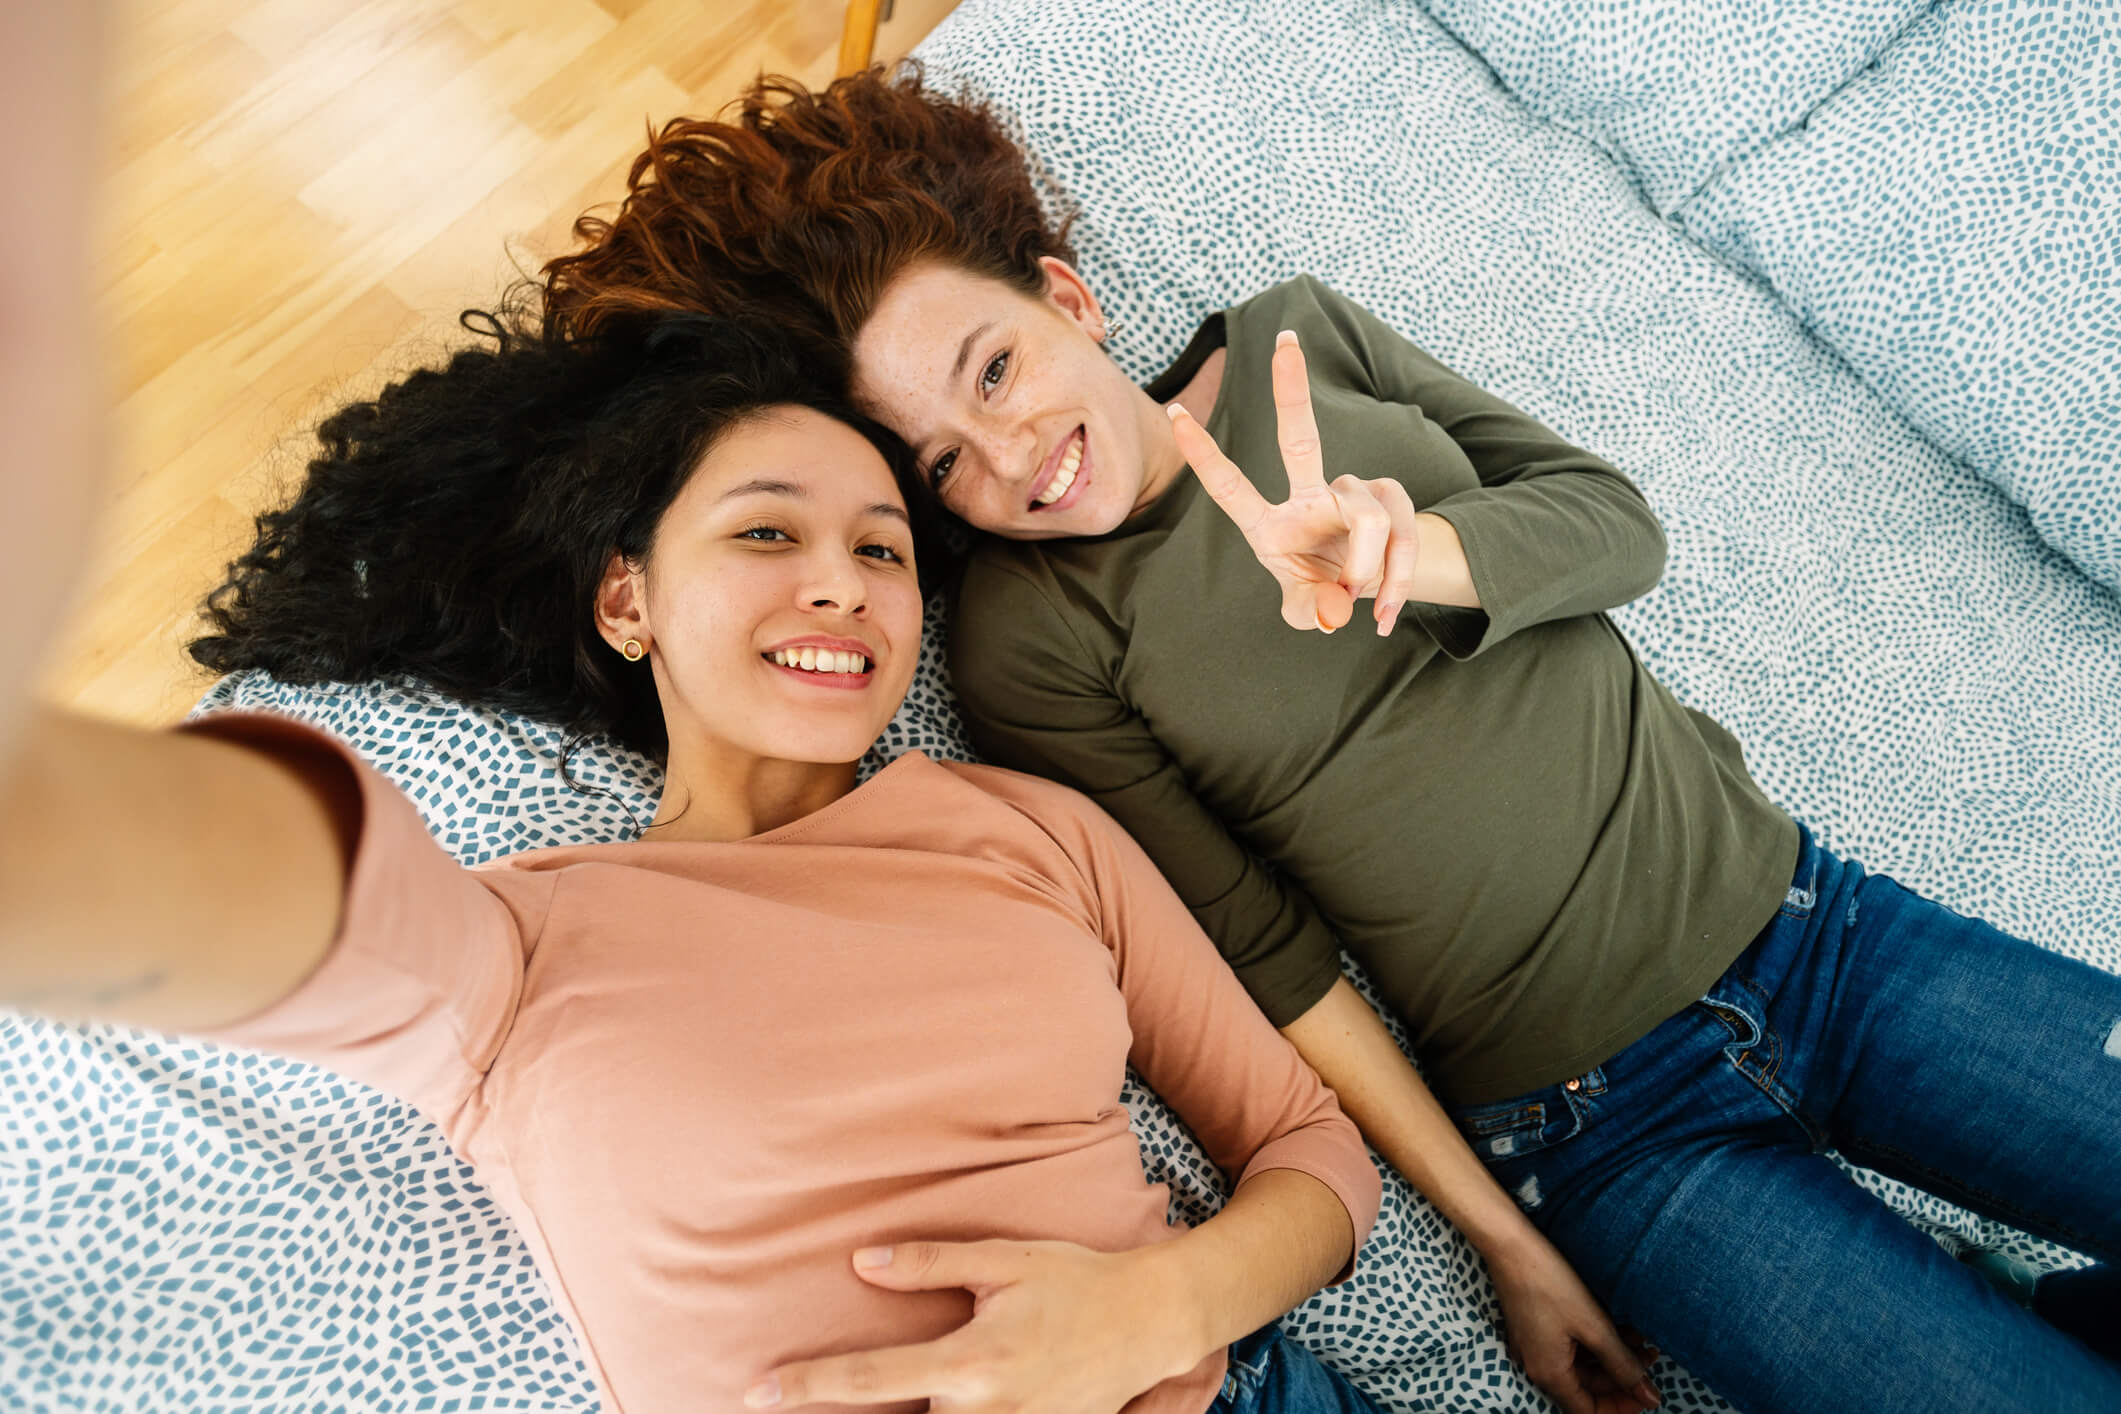 Two teens are lying on a bed, looking up at a camera, and taking a selfie; they are both smiling.